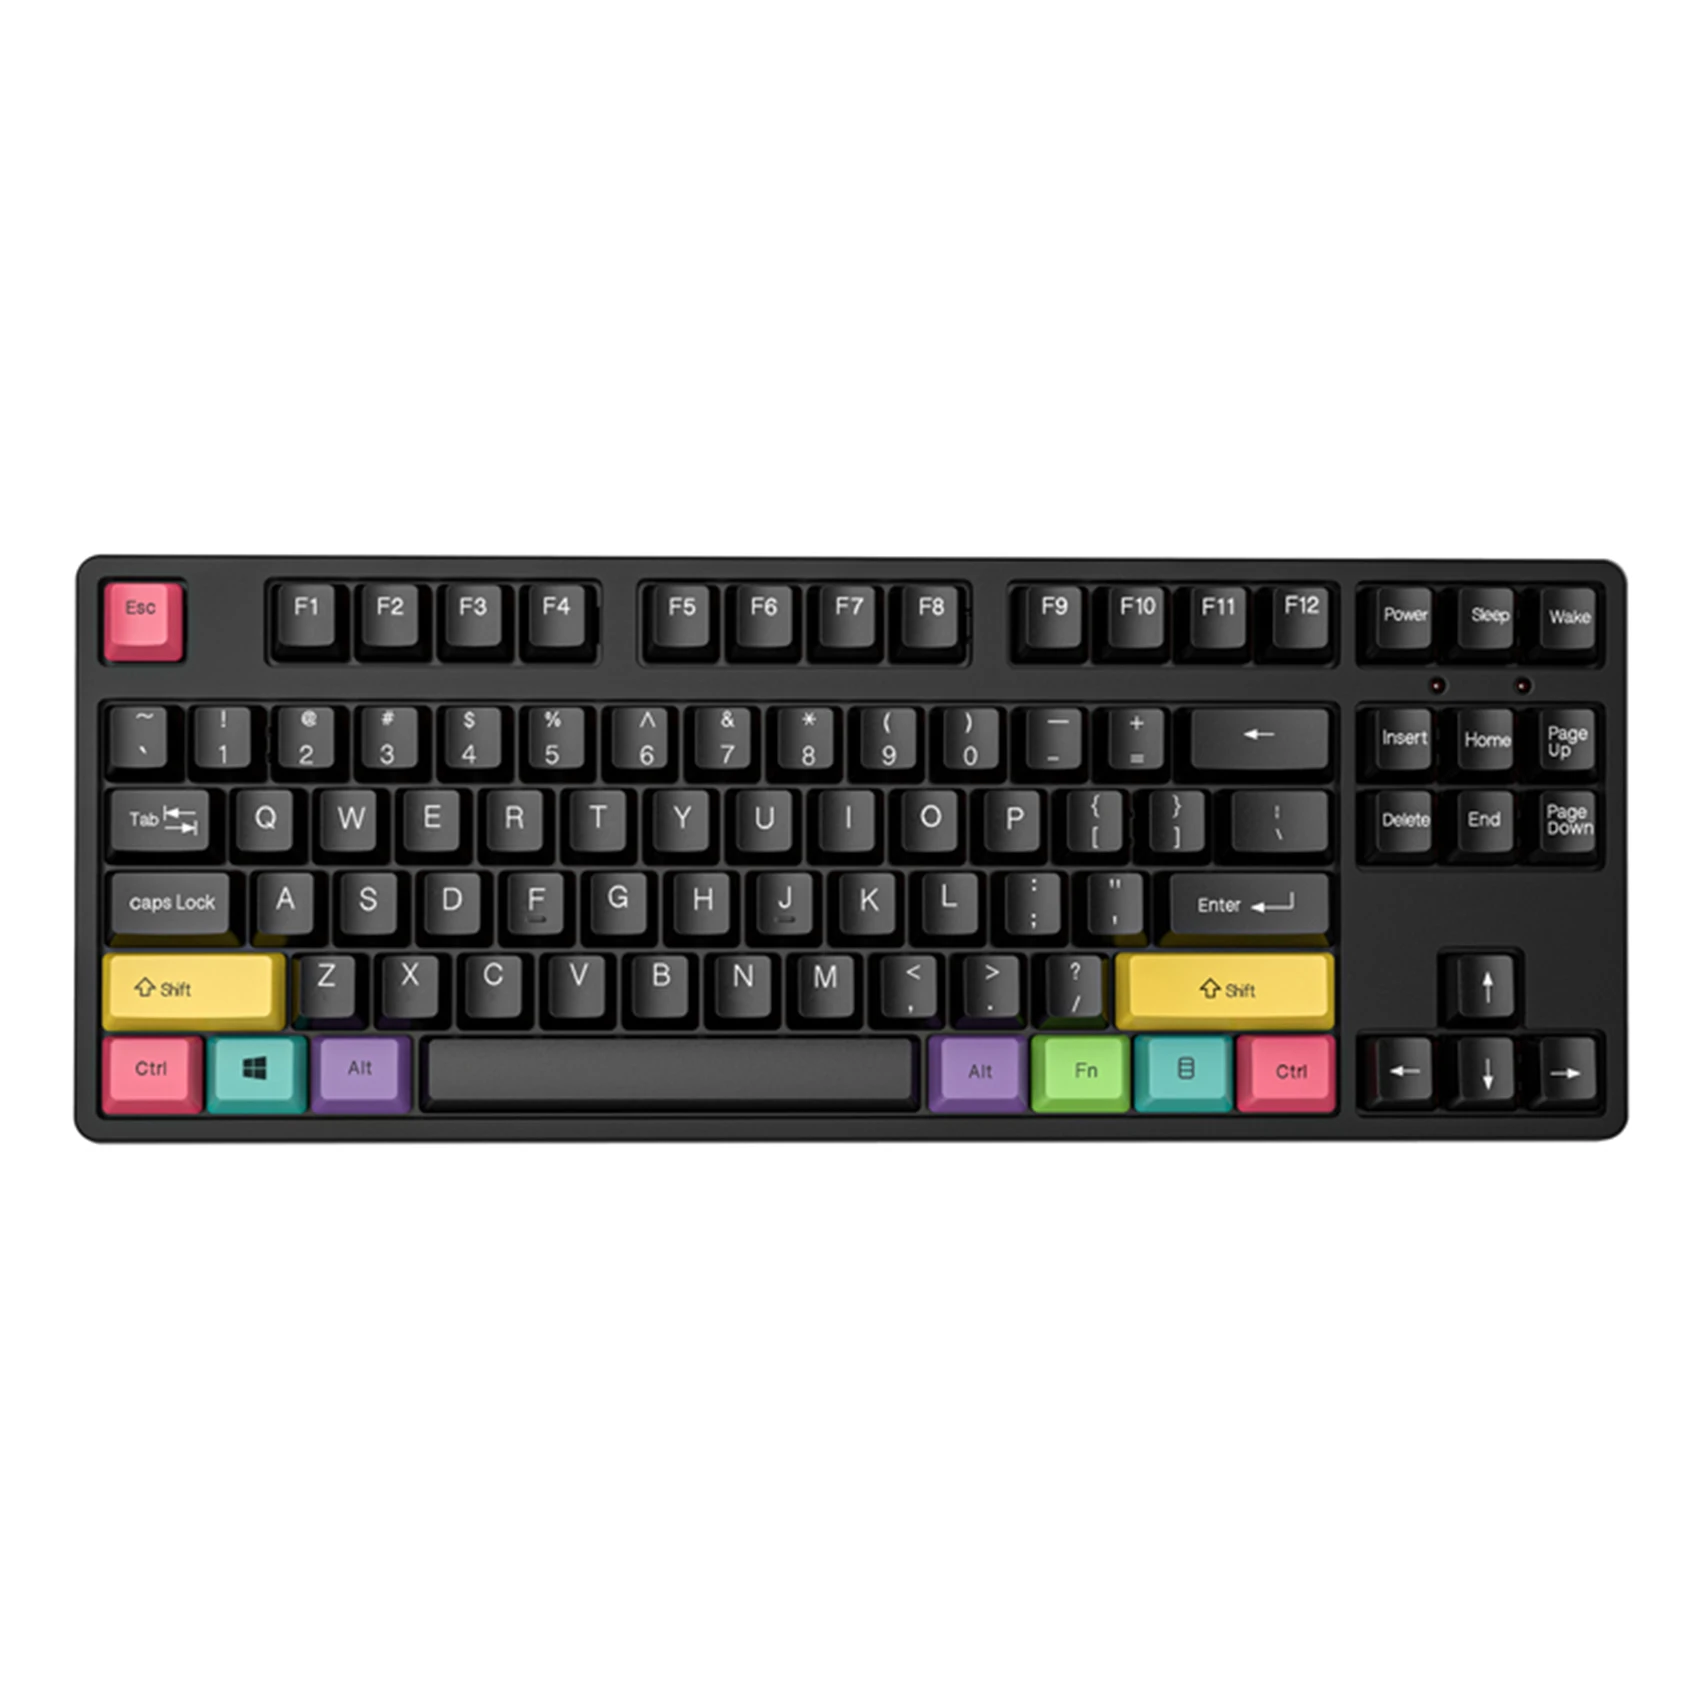 

Mechanical Keyboard Wired 87 Keys Gaming Keyboard Light Emitting Keyboard With PBT Keycaps For PC Gamers Computer